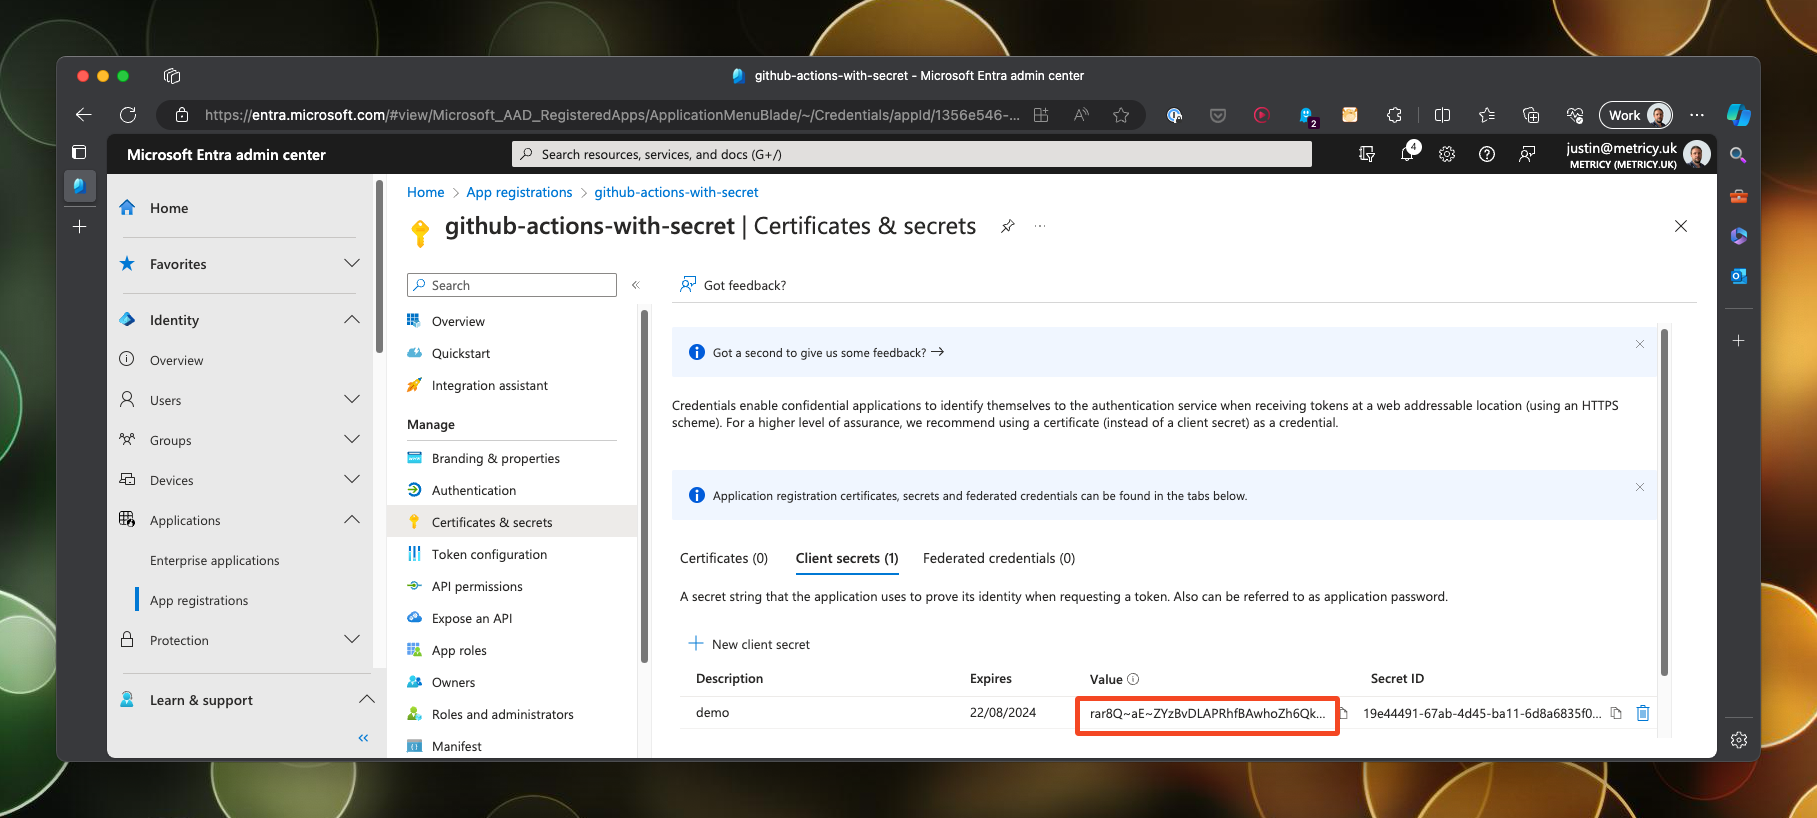 The client secret is displayed in Microsoft Entra Administrator